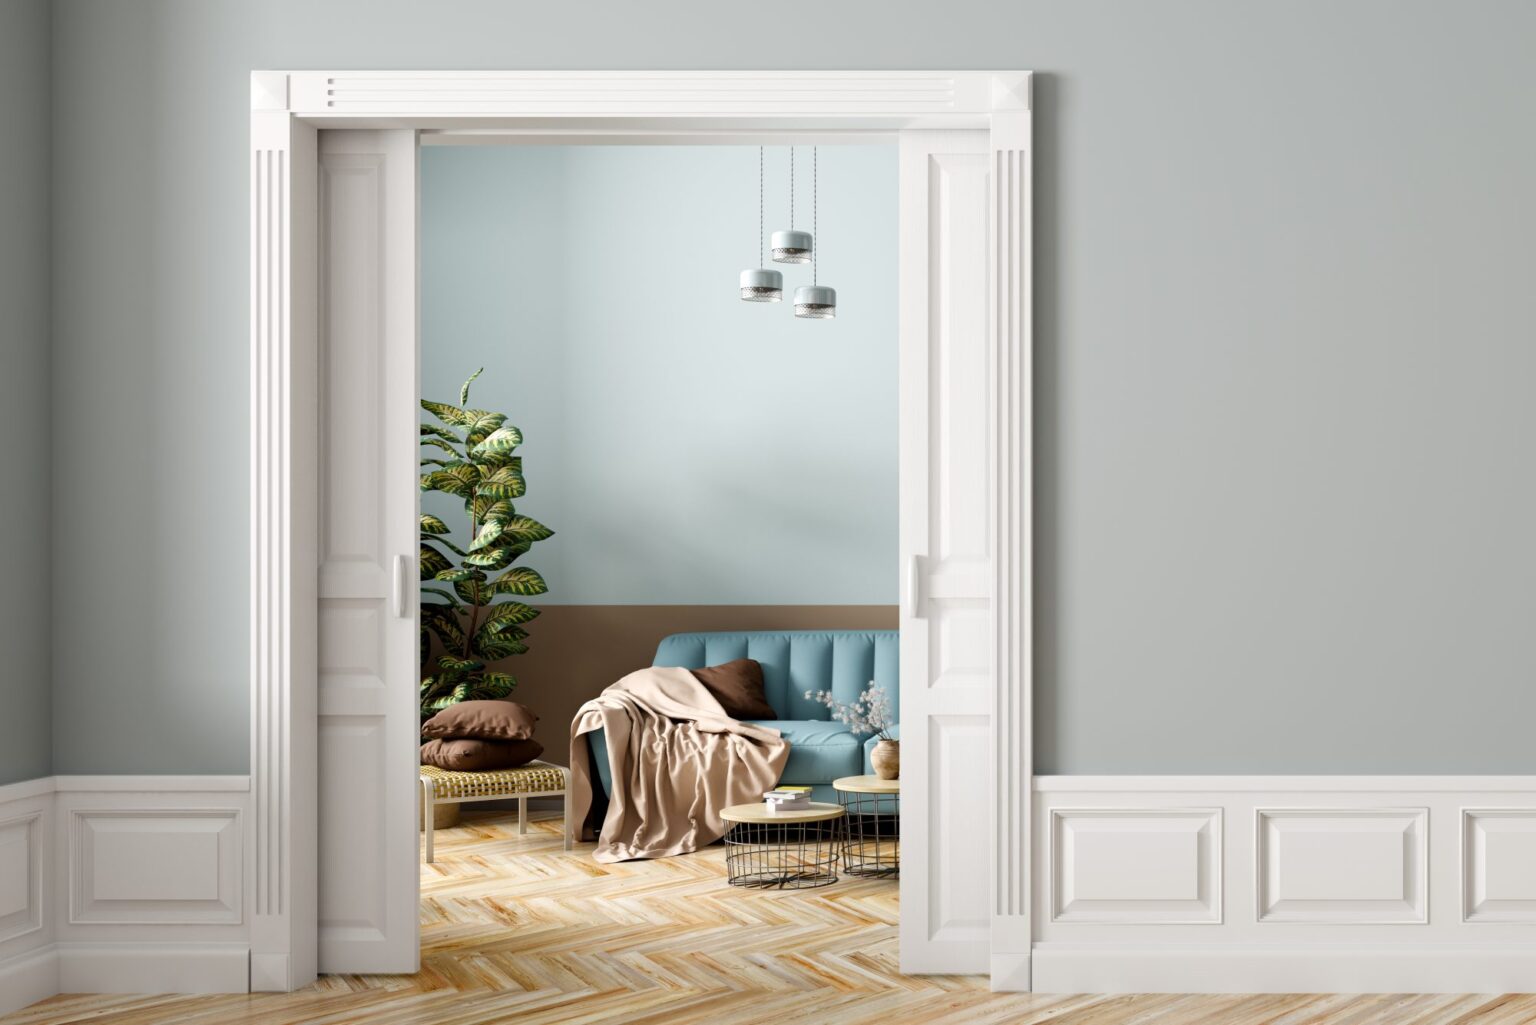 7 Space Saving Door Ideas for Small Spaces You Can’t Miss